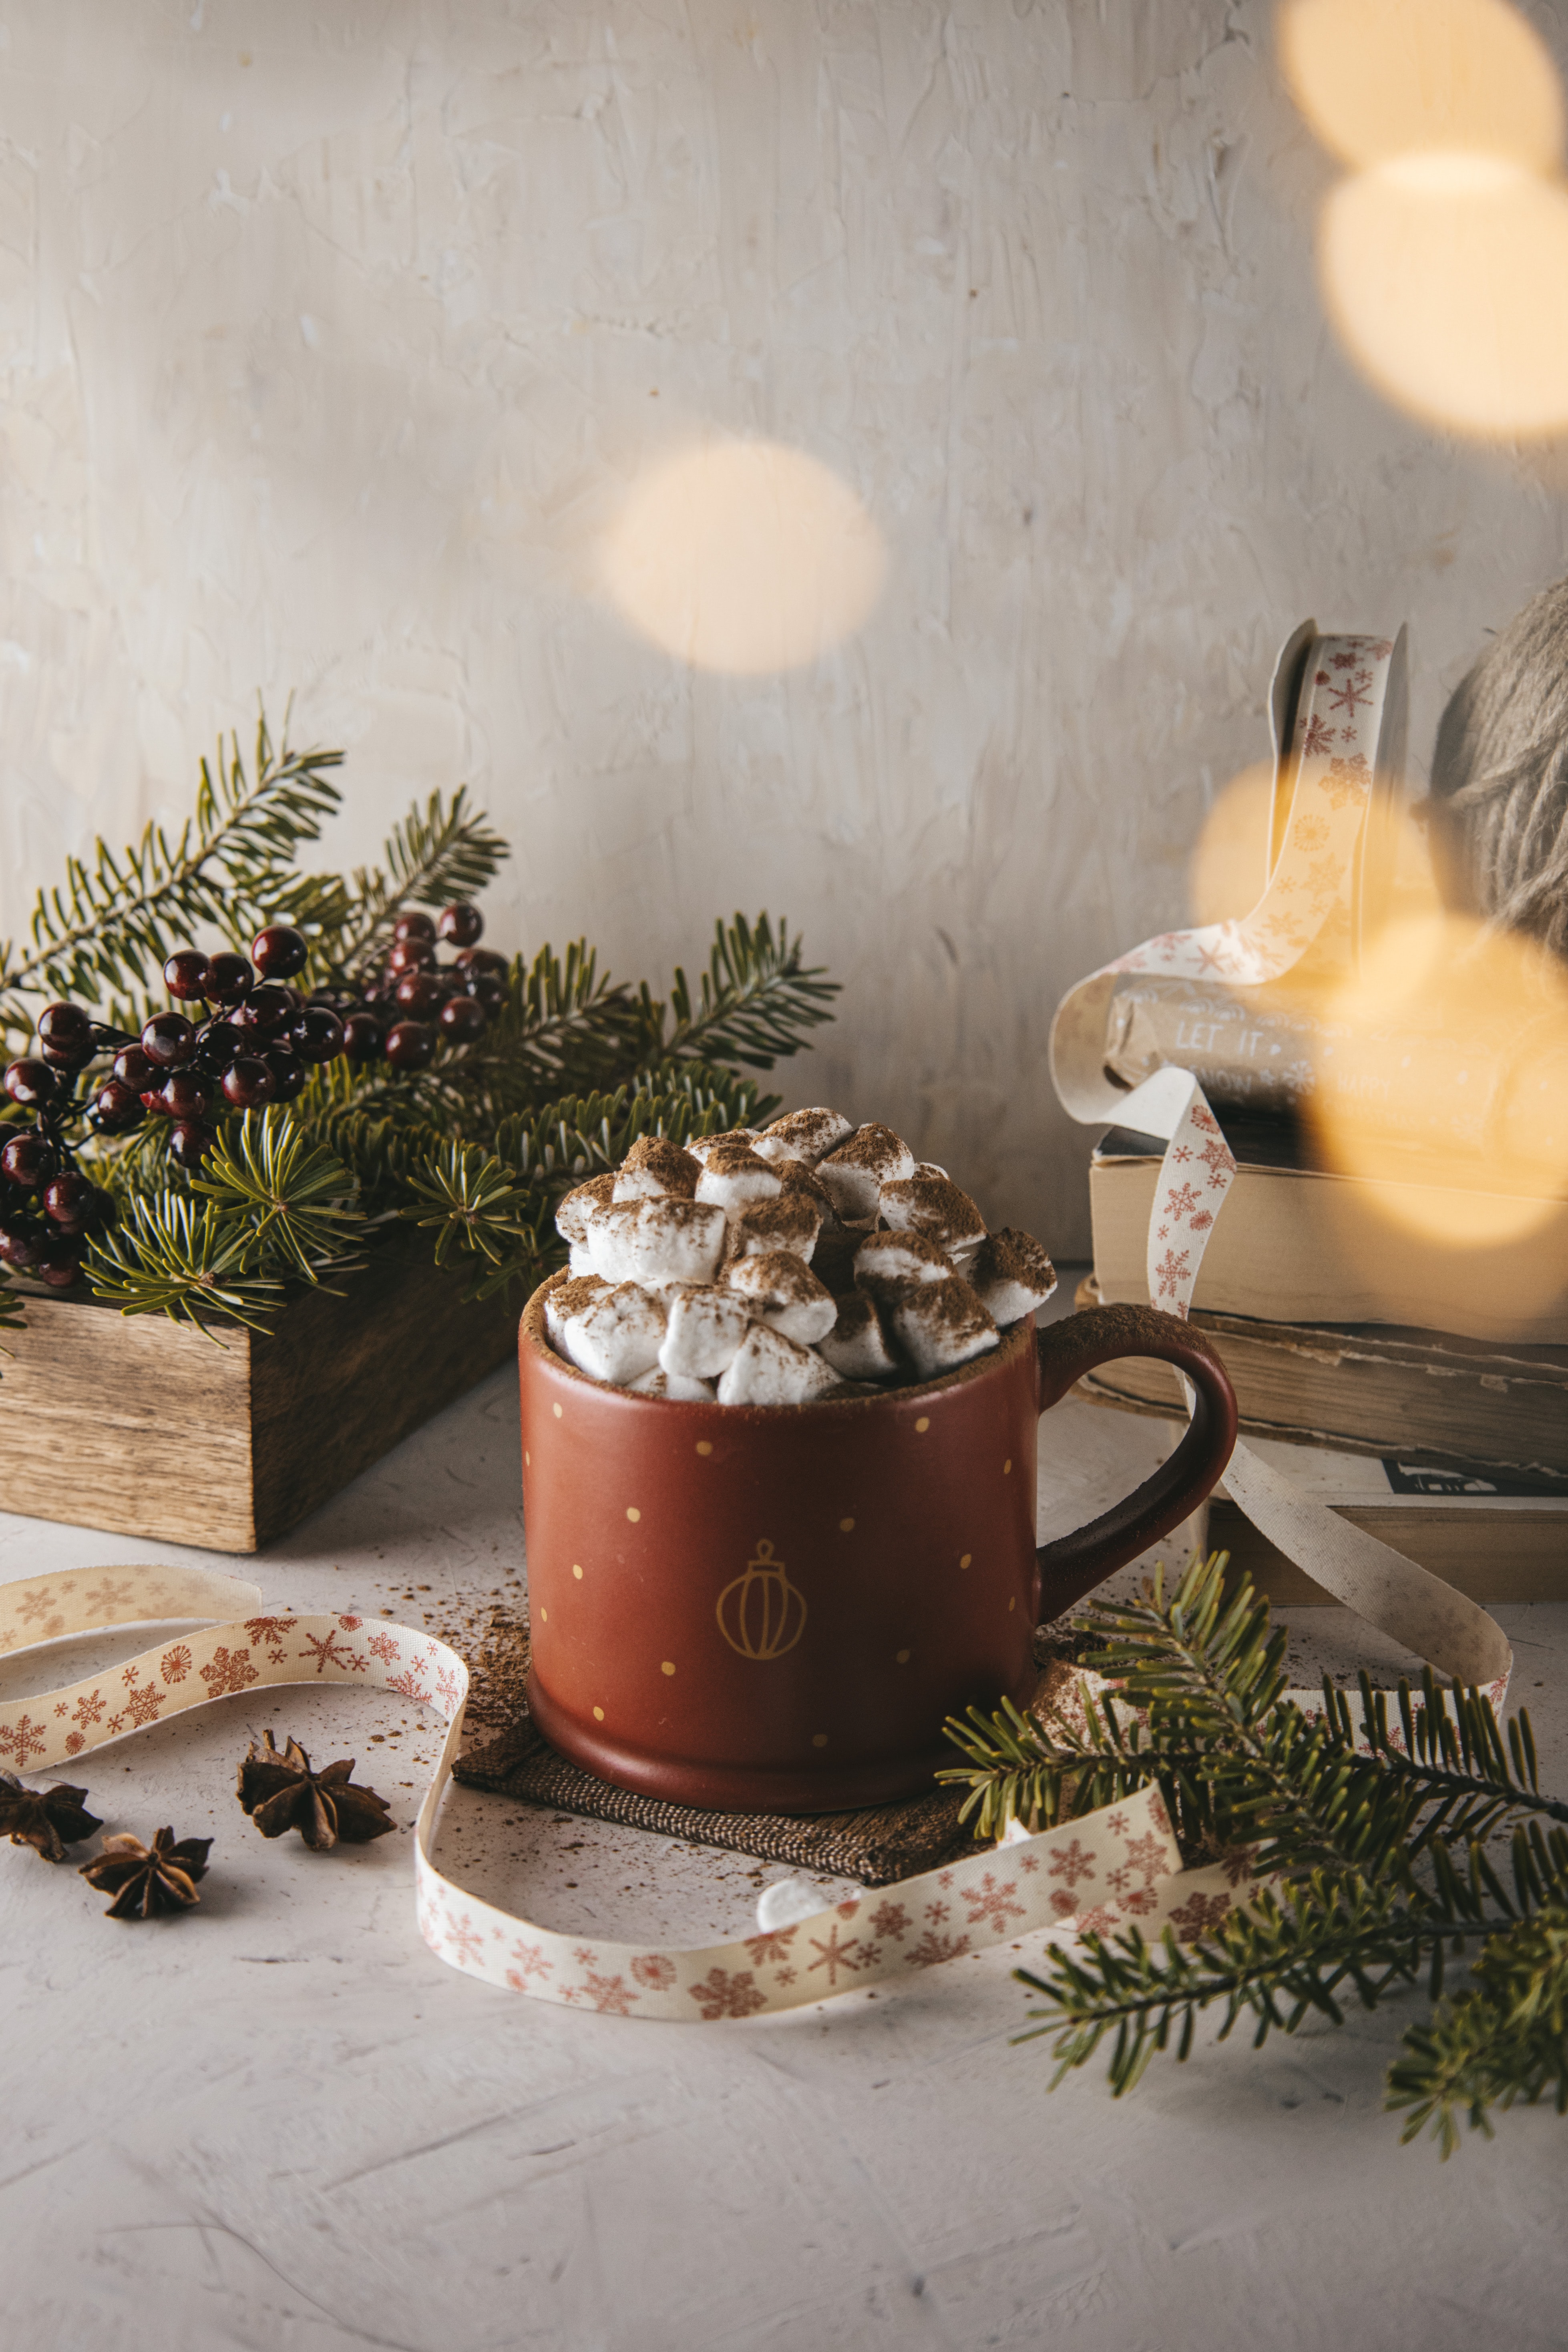 mug, zephyr, food, cup, branches, spruce, fir, marshmallow Free Stock Photo